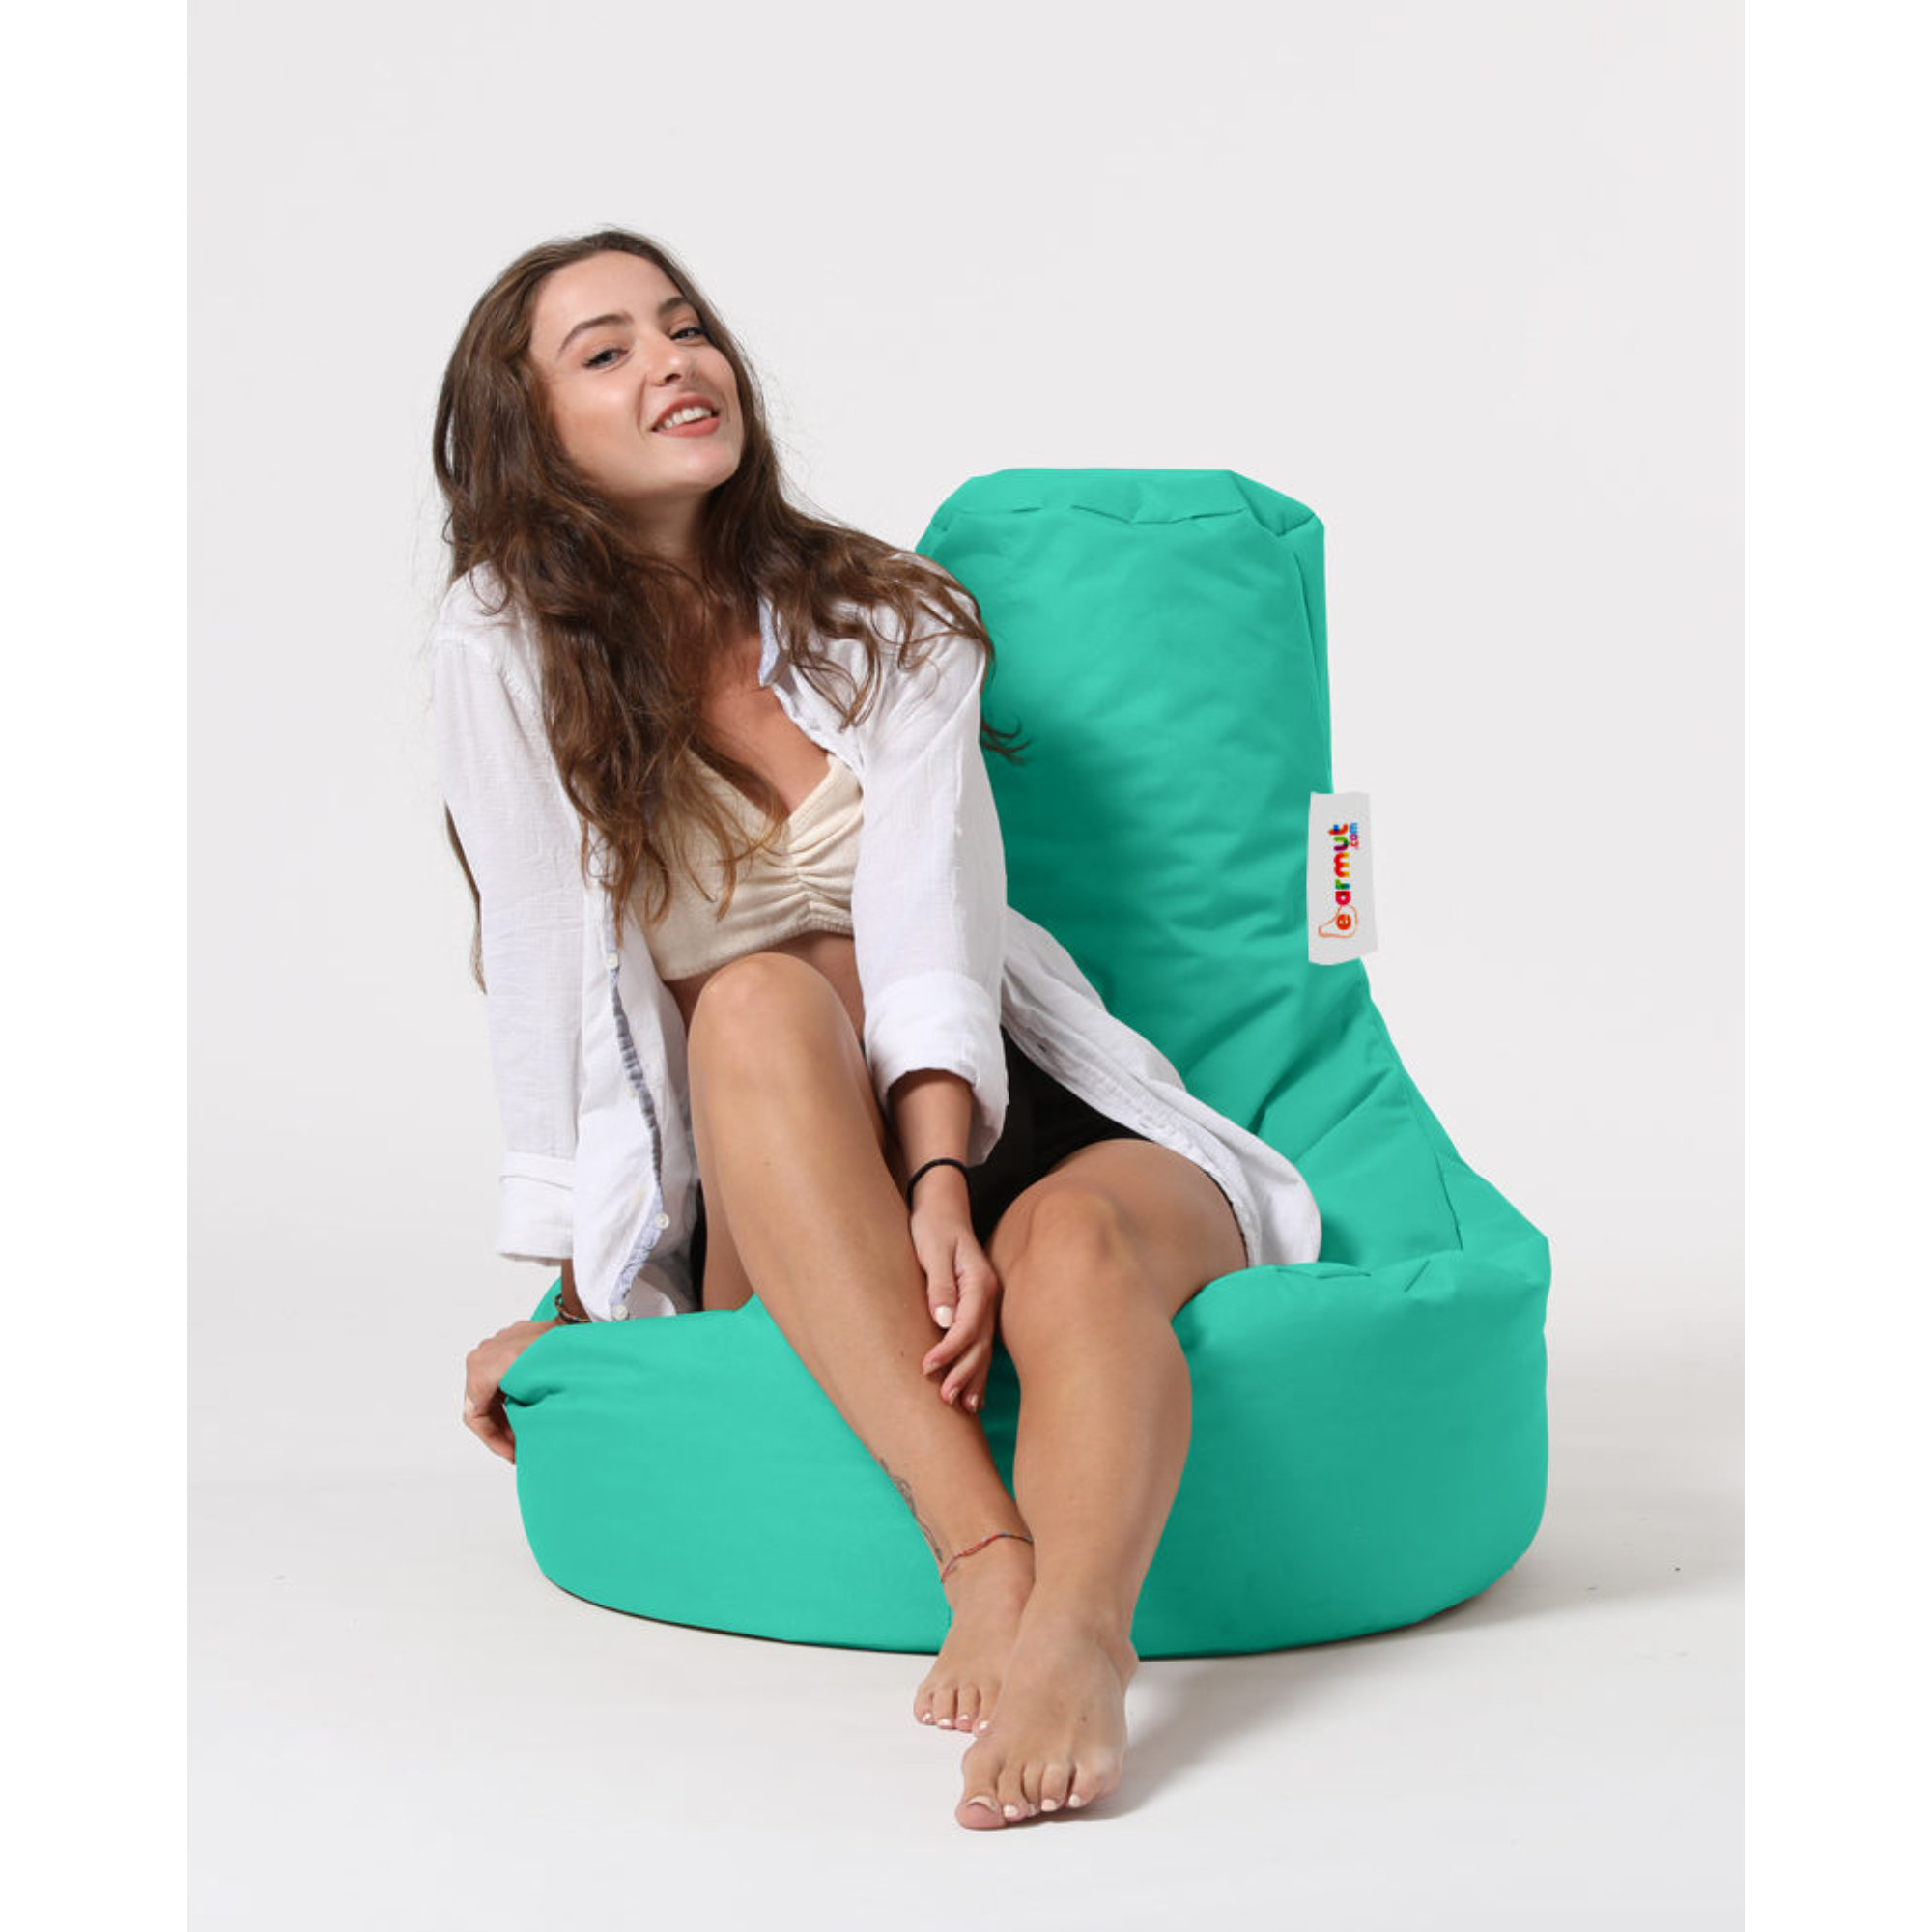 Standard Outdoor Friendly Bean Bag Sofa East Urban Home Fabric: Turquoise 100% Polyester